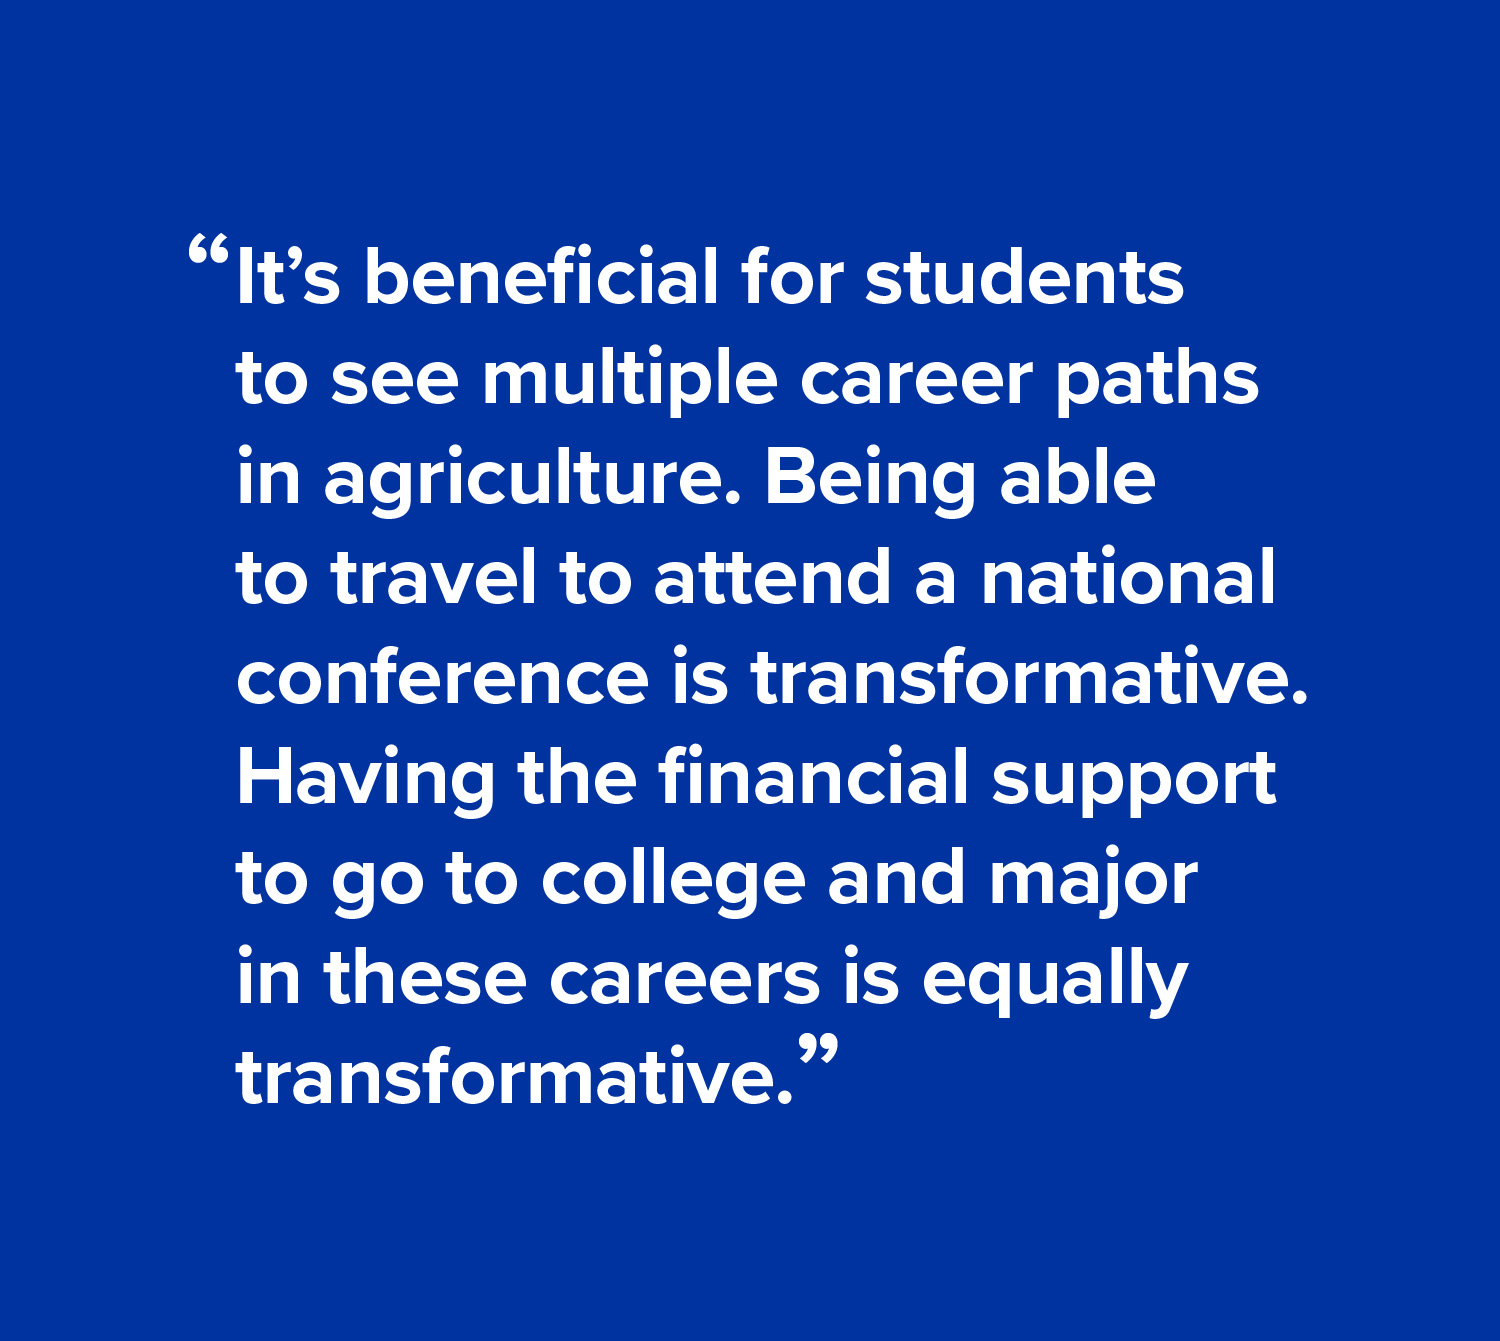 It’s beneficial for students to see multiple career paths in agriculture. Being able to travel to attend a national conference is transformative. Having the financial support to go to college and major in these careers is equally transformative.